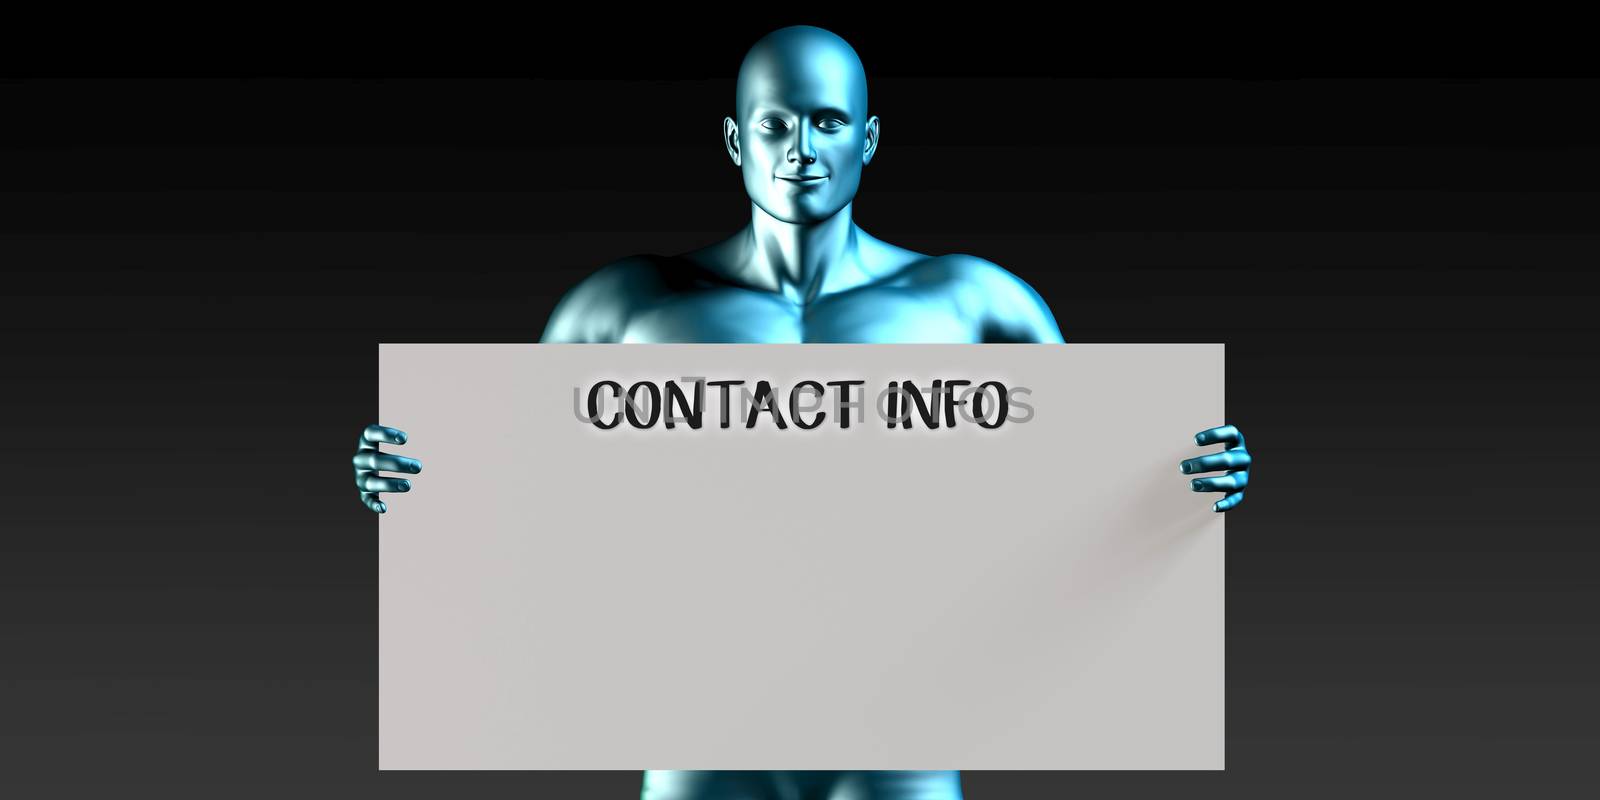 Contact Info by kentoh